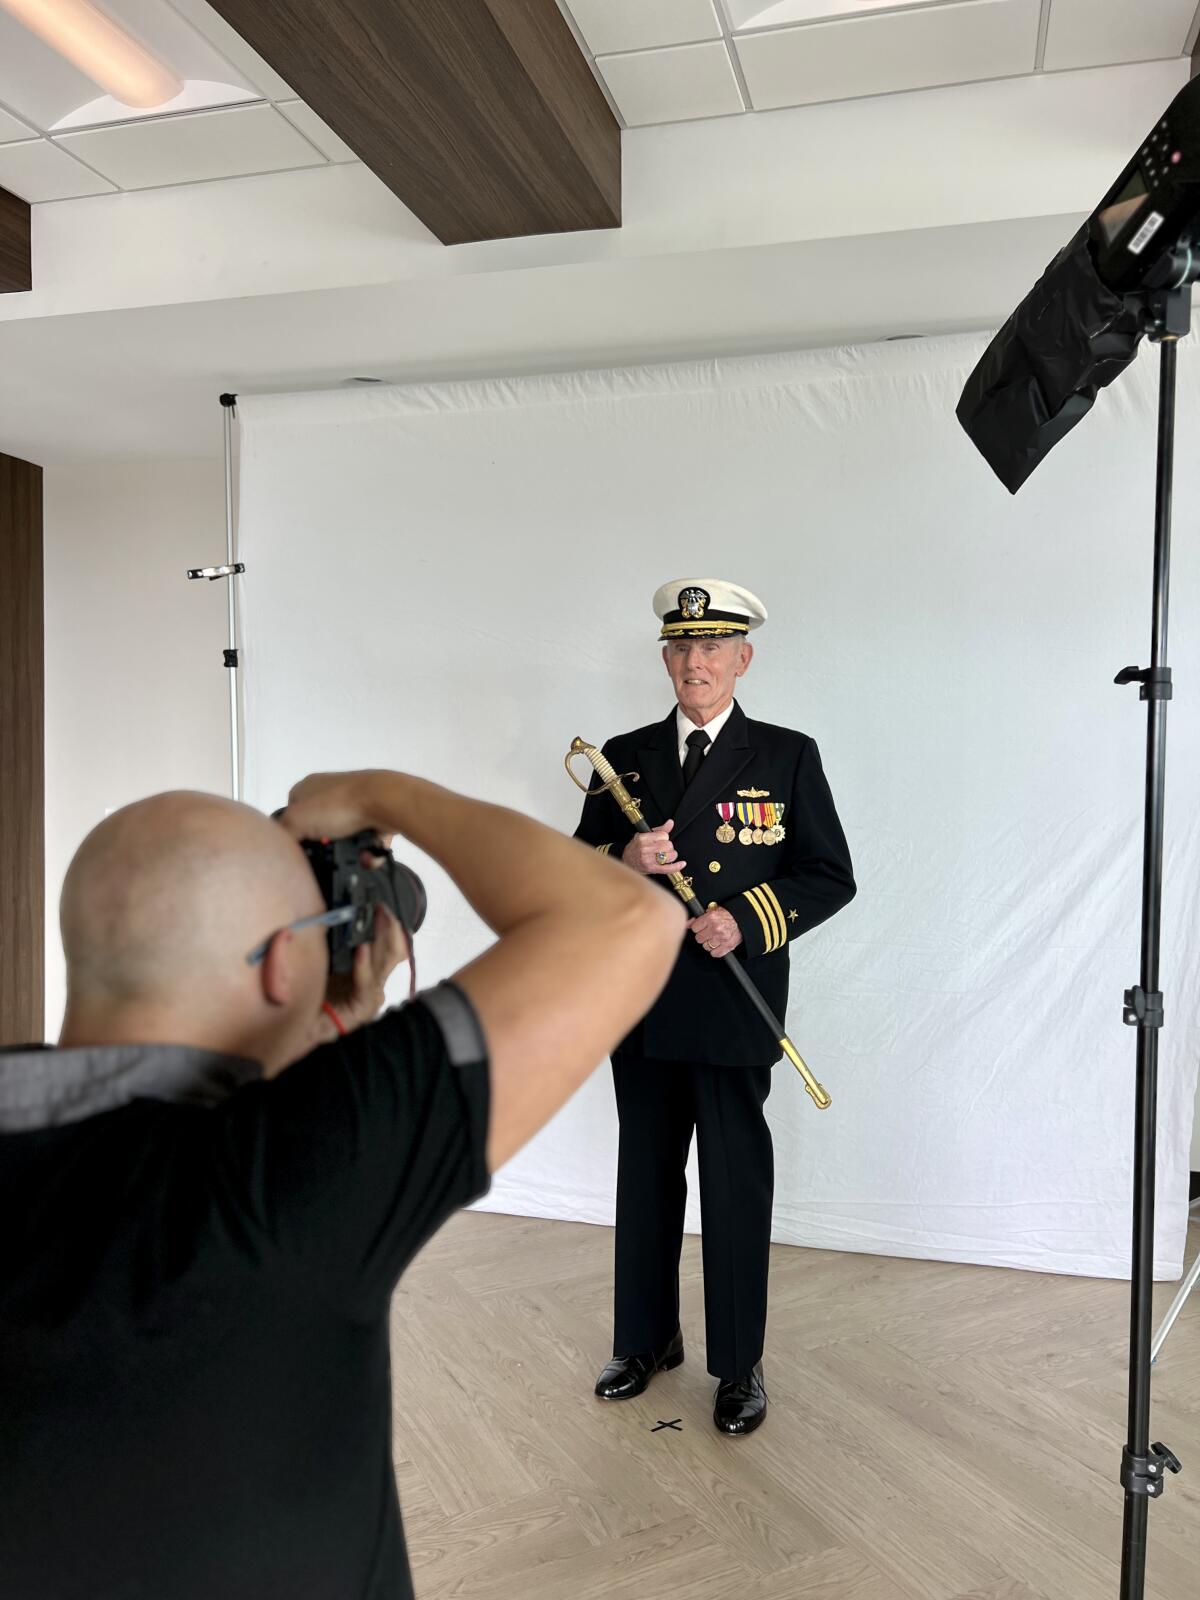 Thomas Sanders photographs Bill Massicot, a naval commander who served from 1960 to 1988, in full dress uniform.